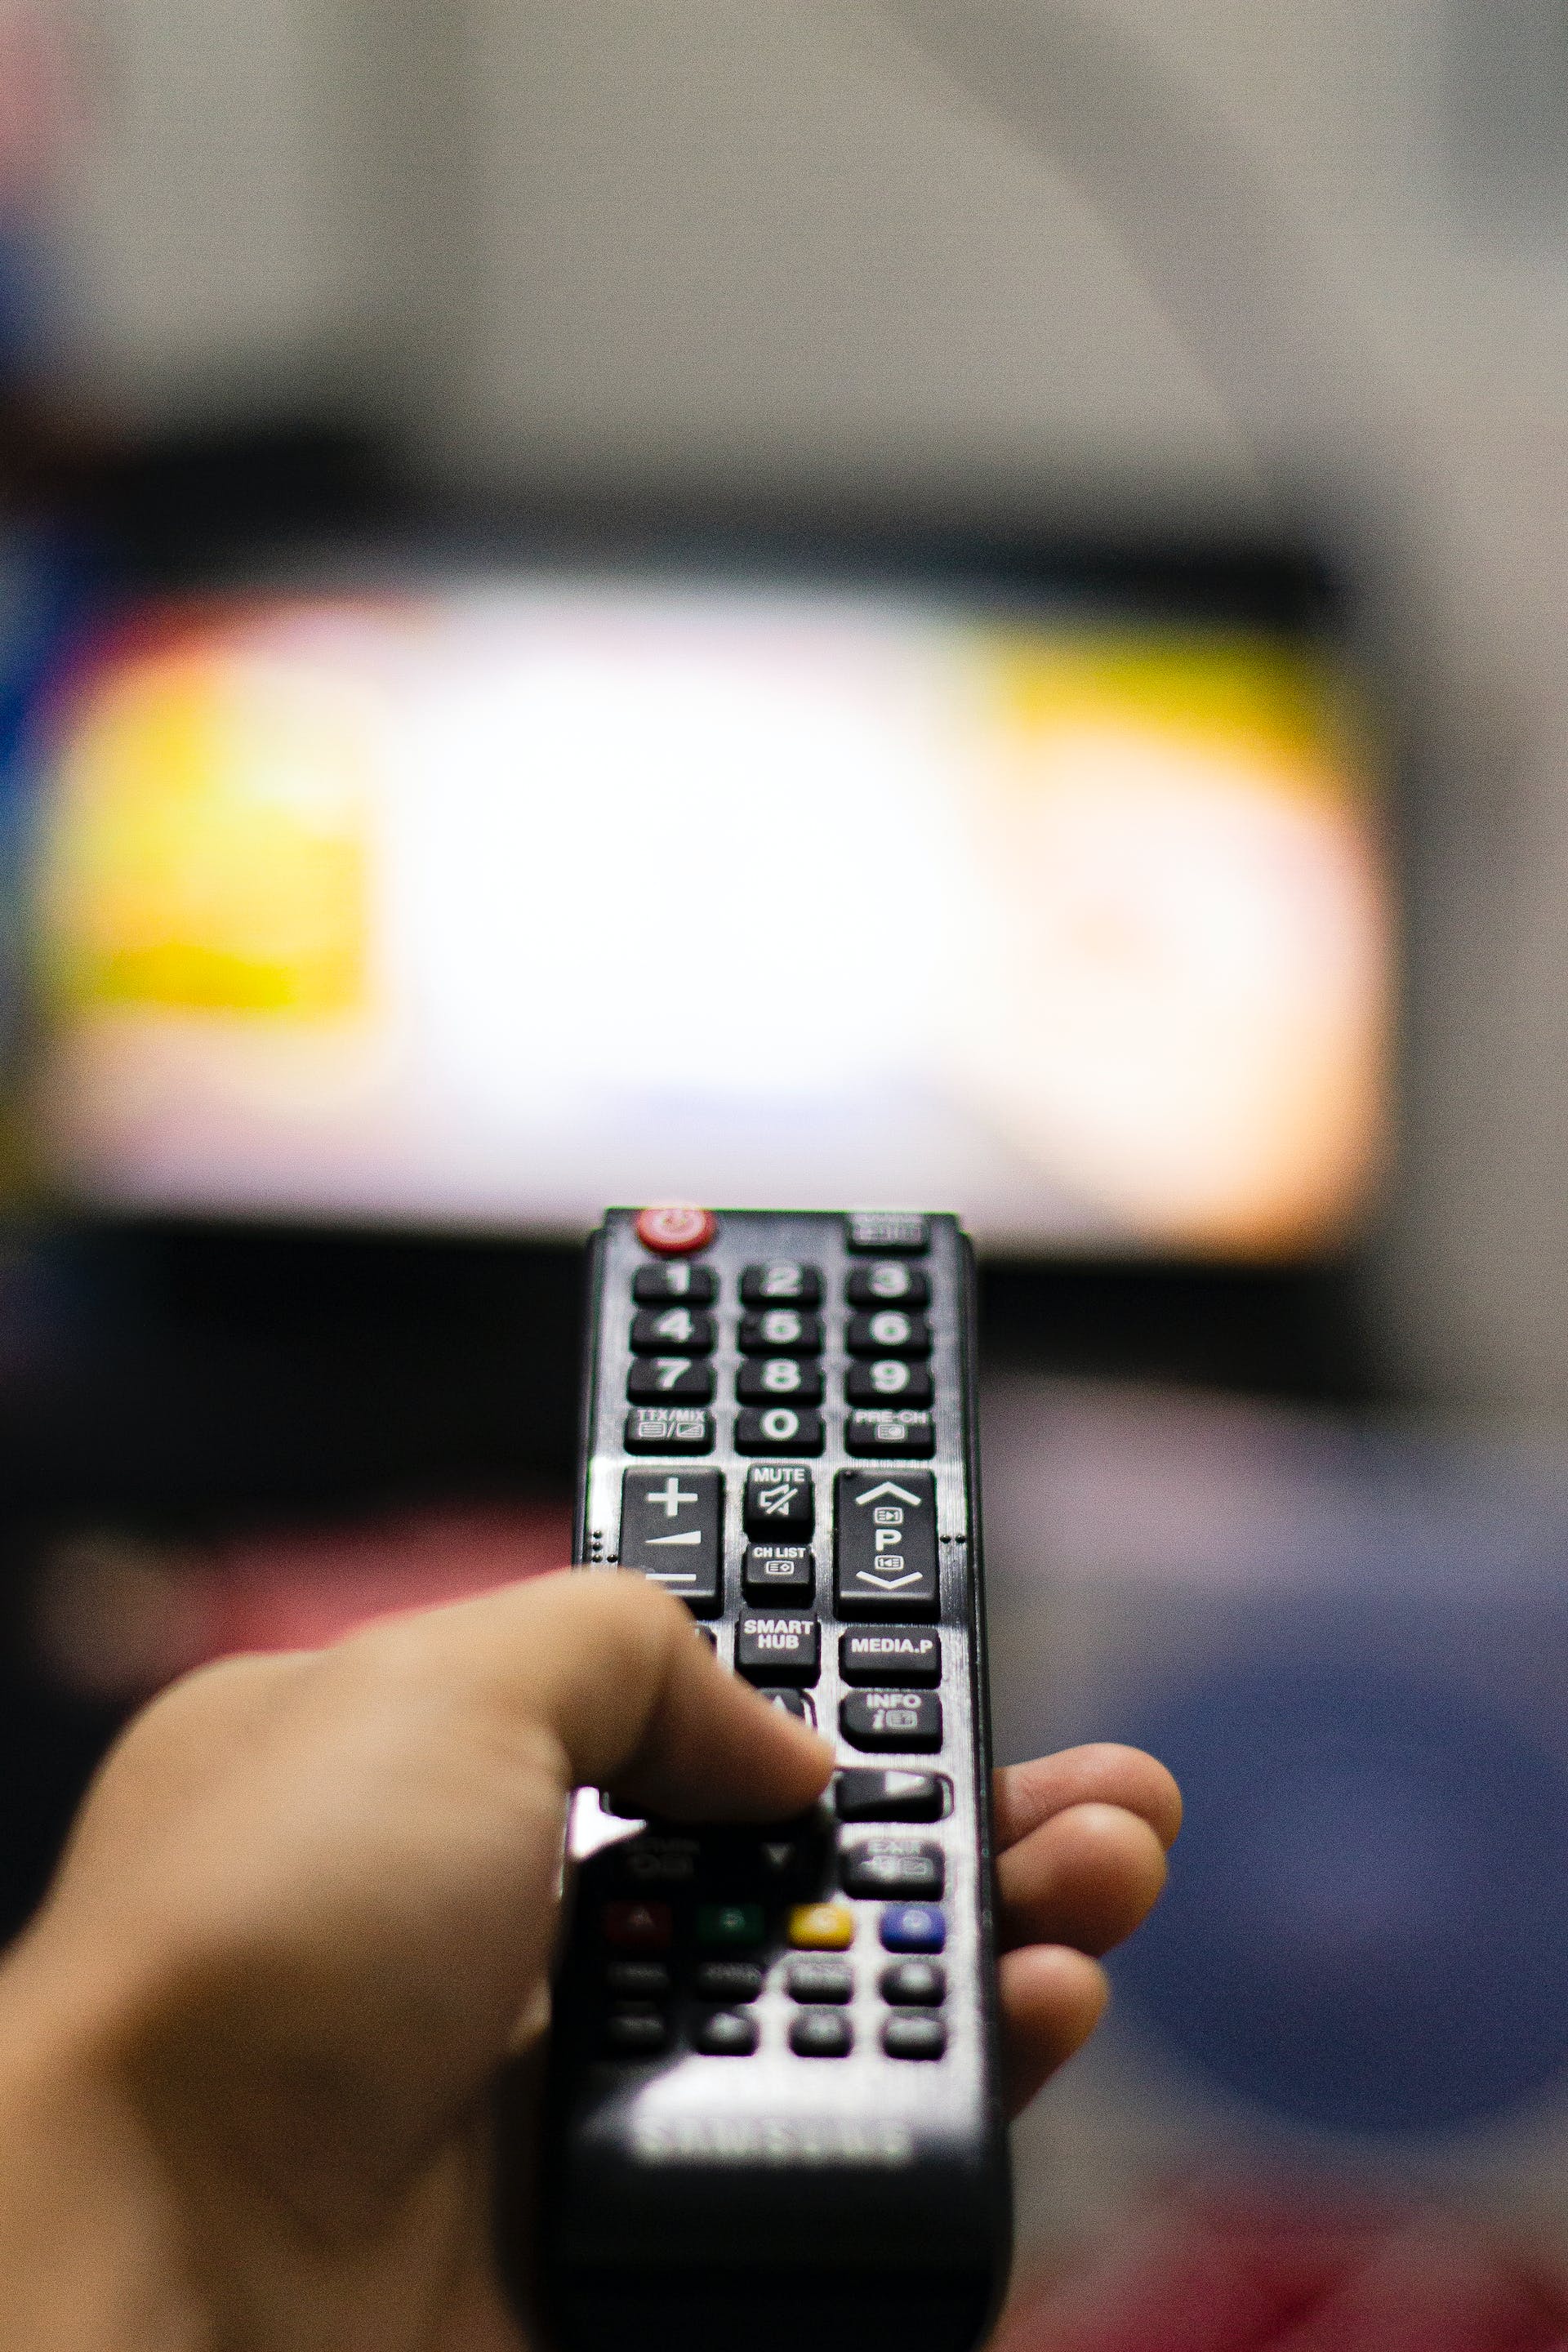 A person holding a remote control | Source: Pexels